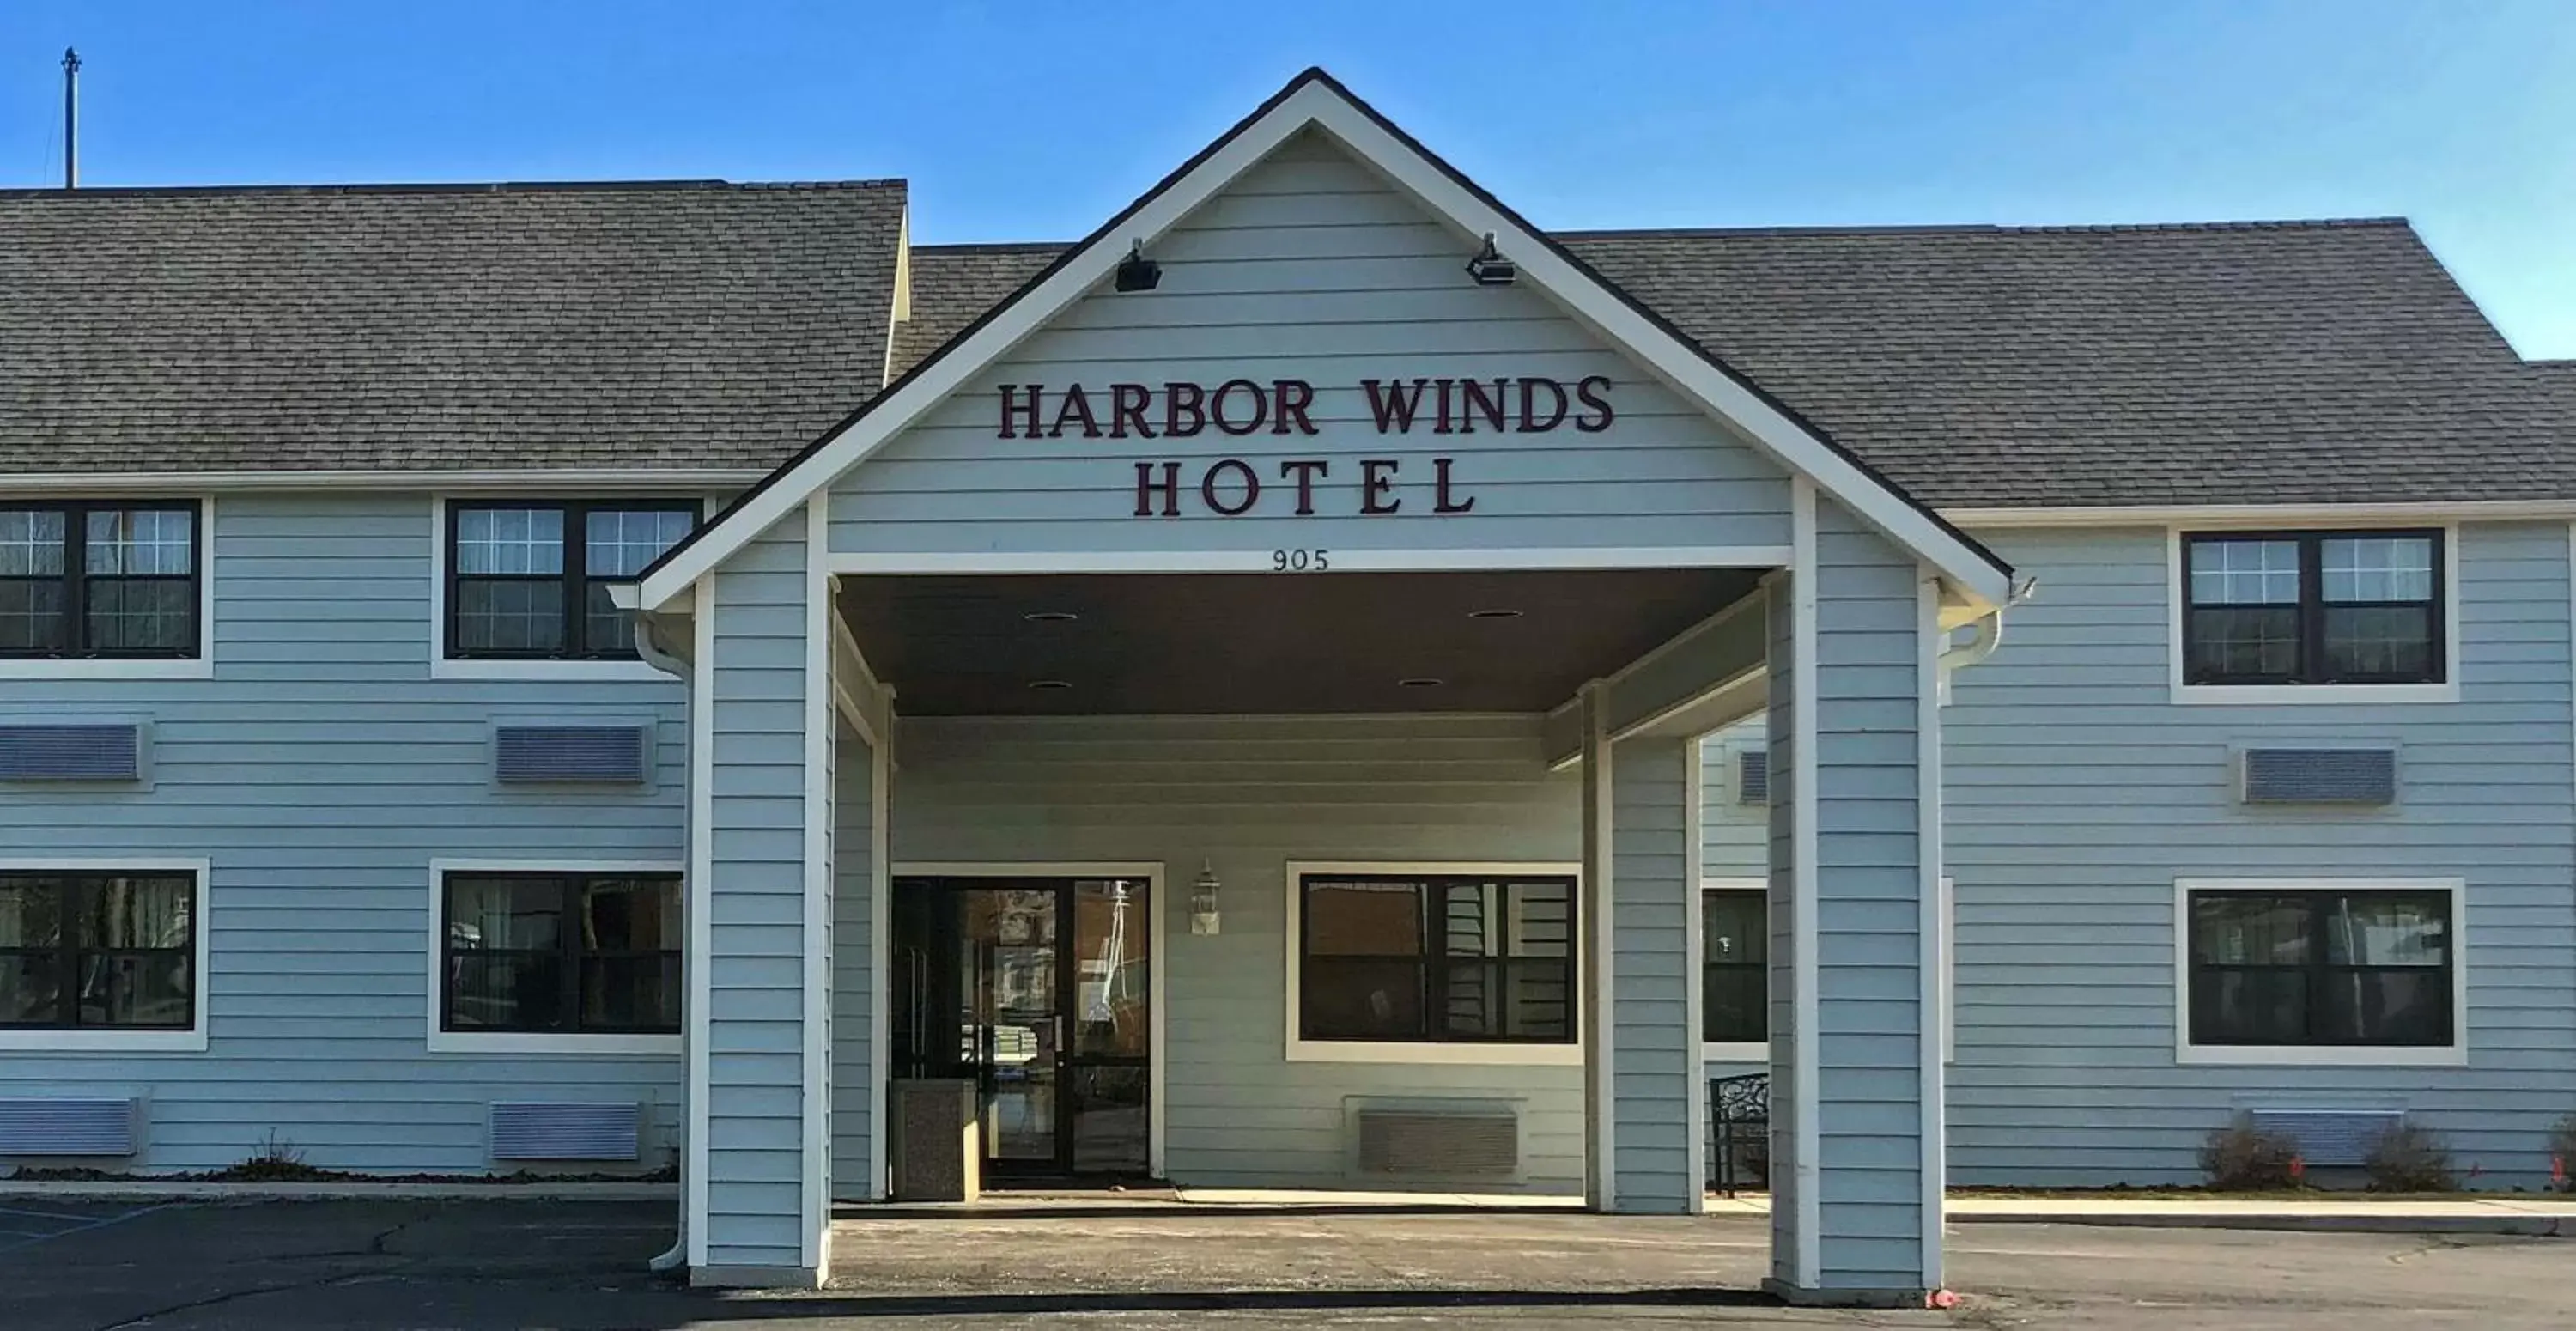 Property building in Harbor Winds Hotel